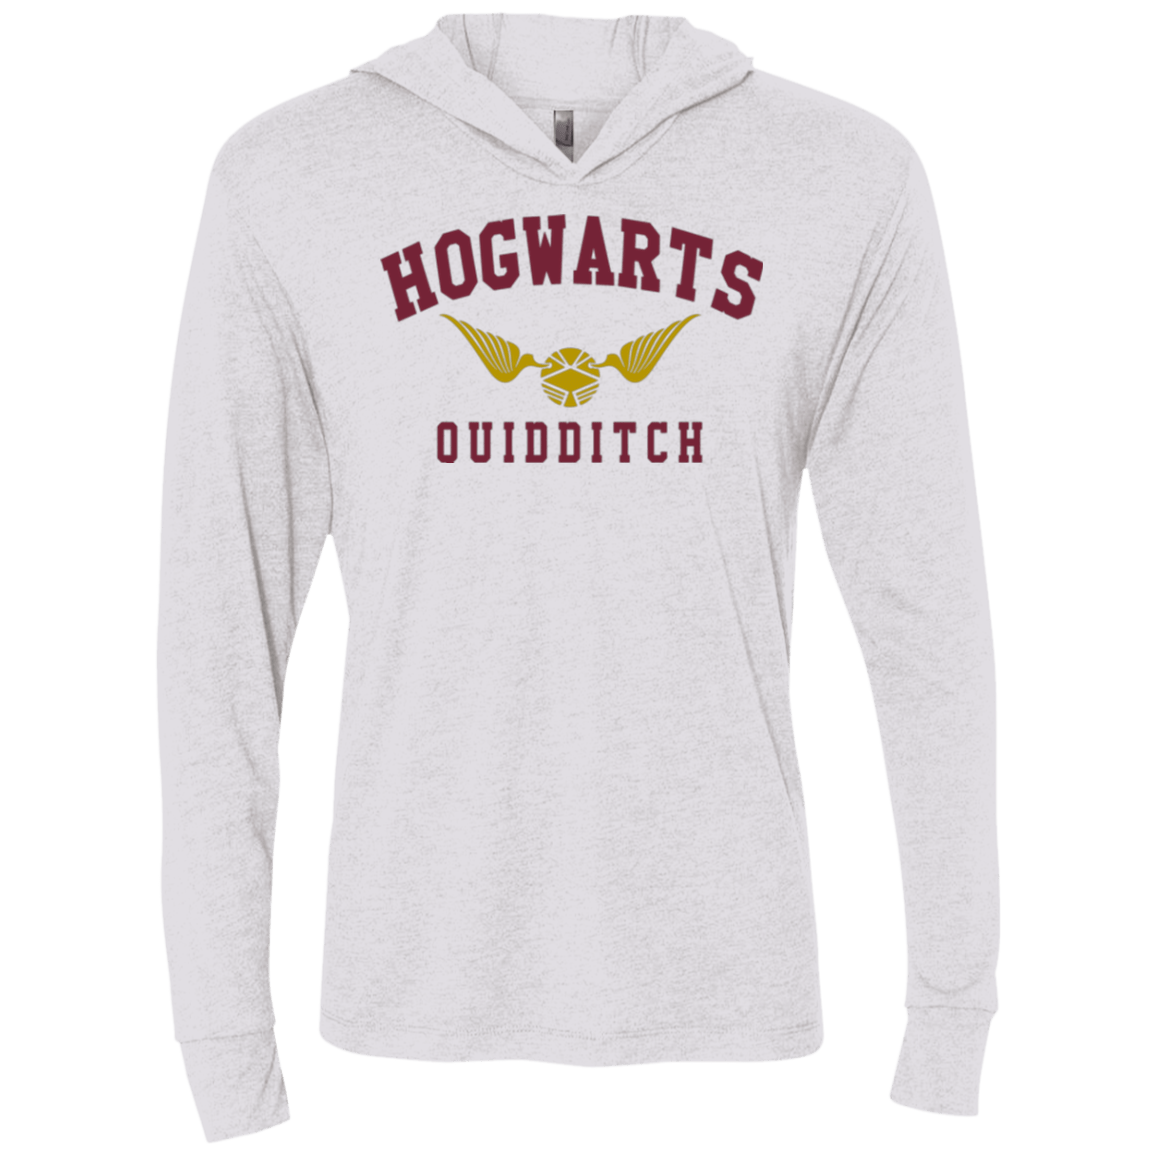 T-Shirts Heather White / X-Small Hogwarts Quidditch Triblend Long Sleeve Hoodie Tee